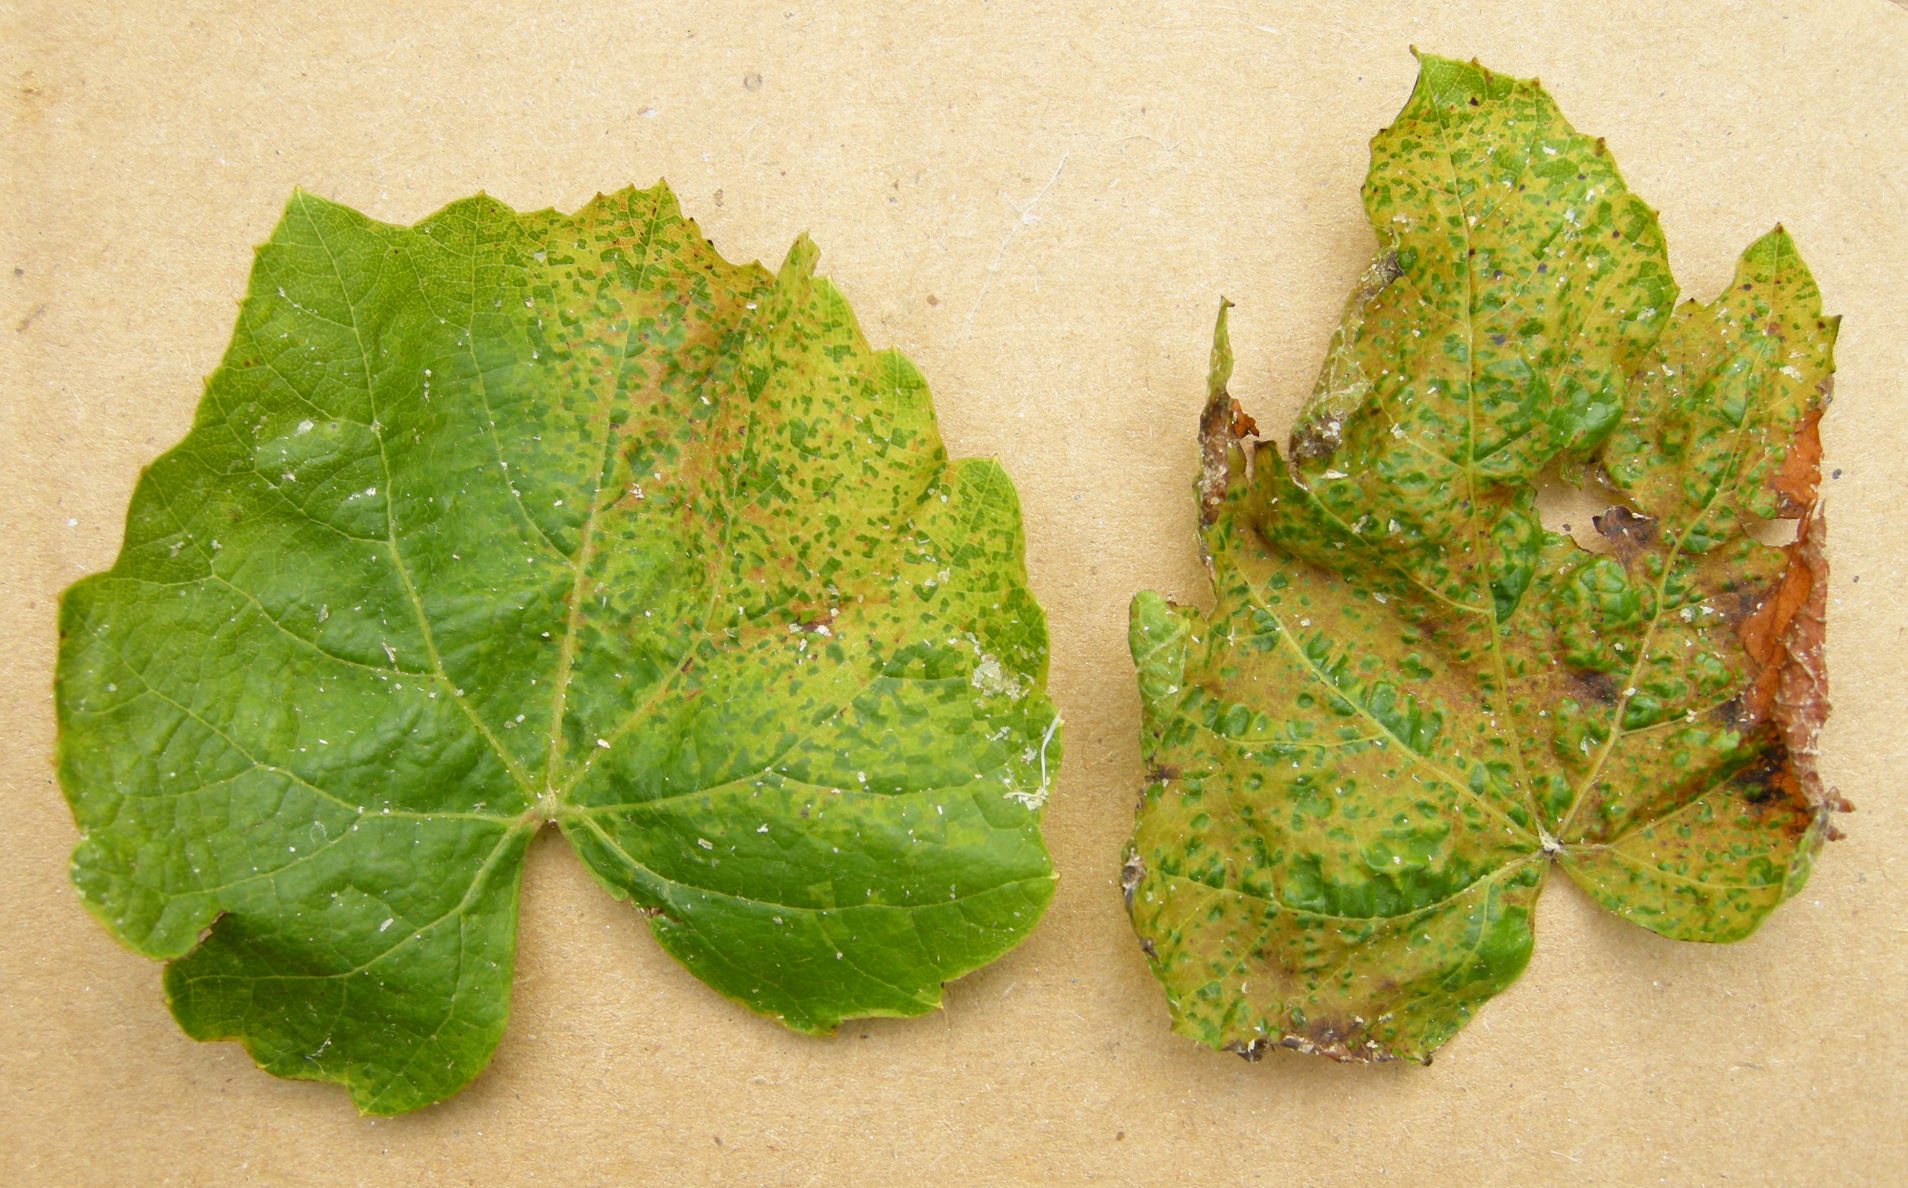 Leaf distortion caused by freeze injury that occurred during the bud stage. 